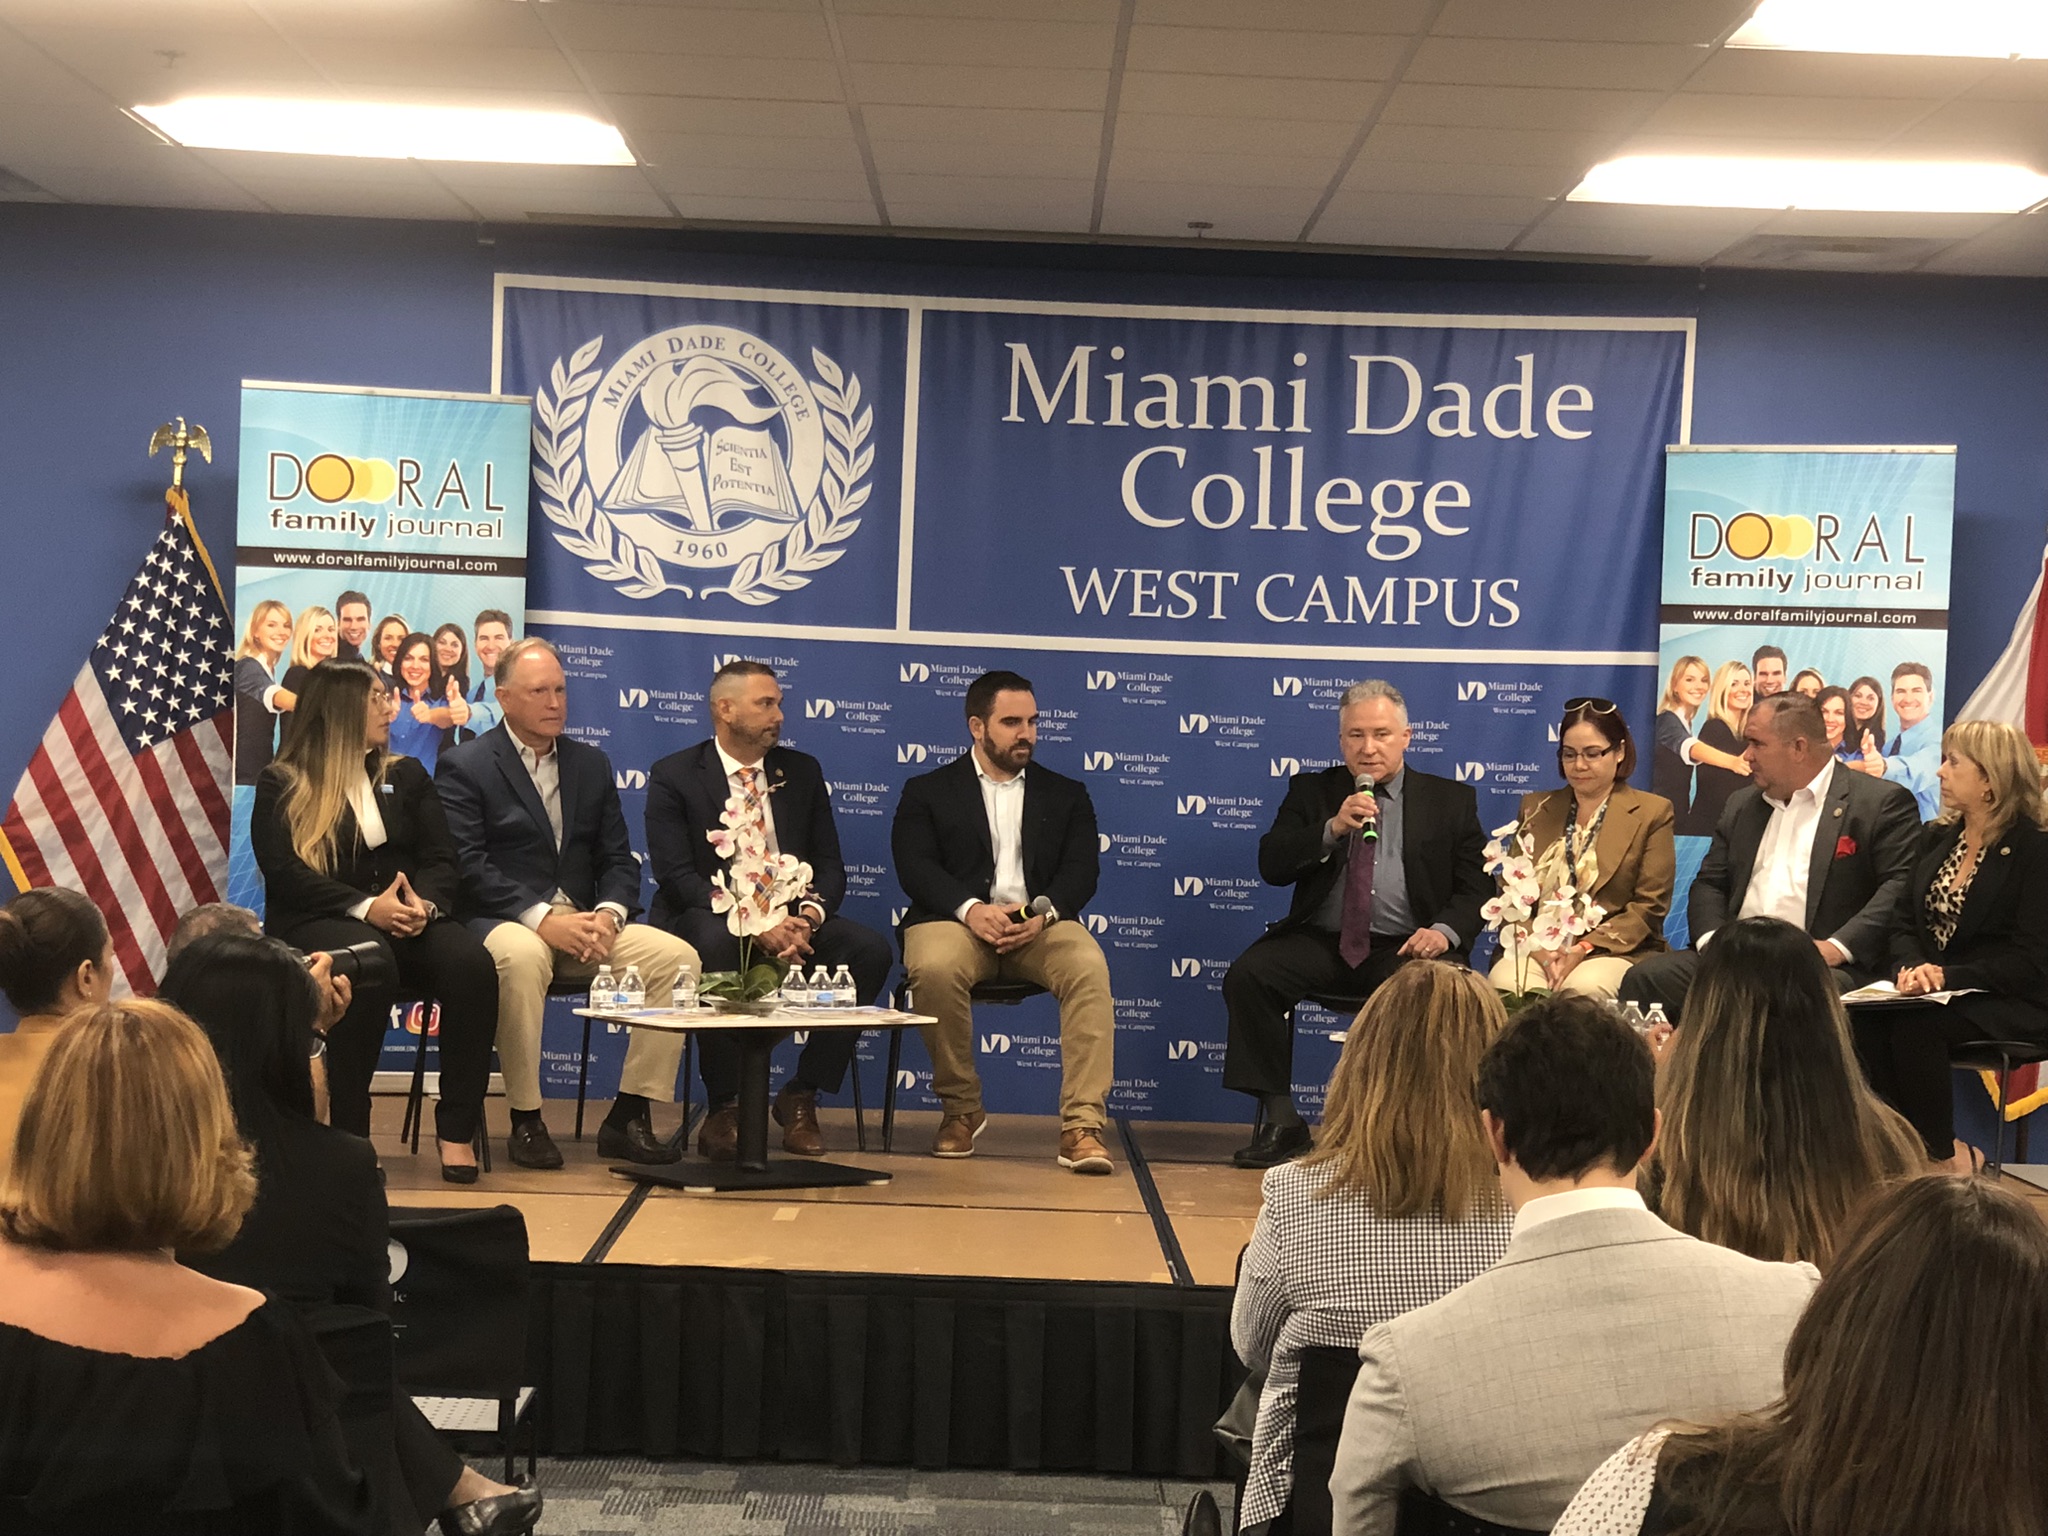 Professionals sitting on stage at the Miami Dade College West Campus speaking amongst each other and to crowd.